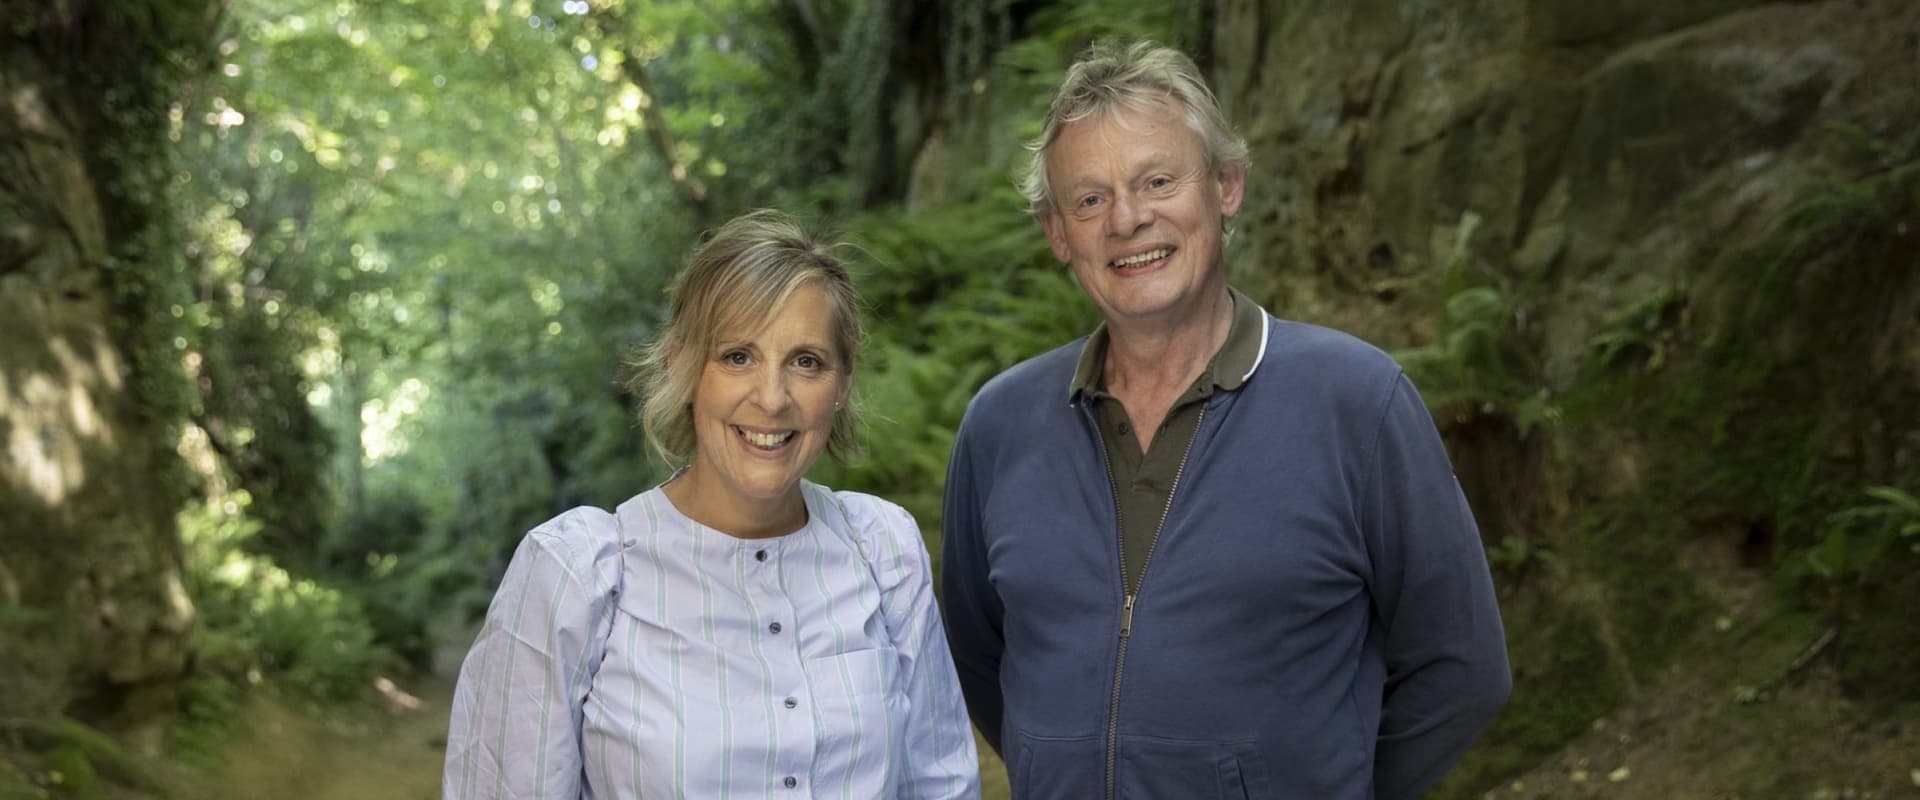 Mel Giedroyc & Martin Clunes Explore Britain by the Book